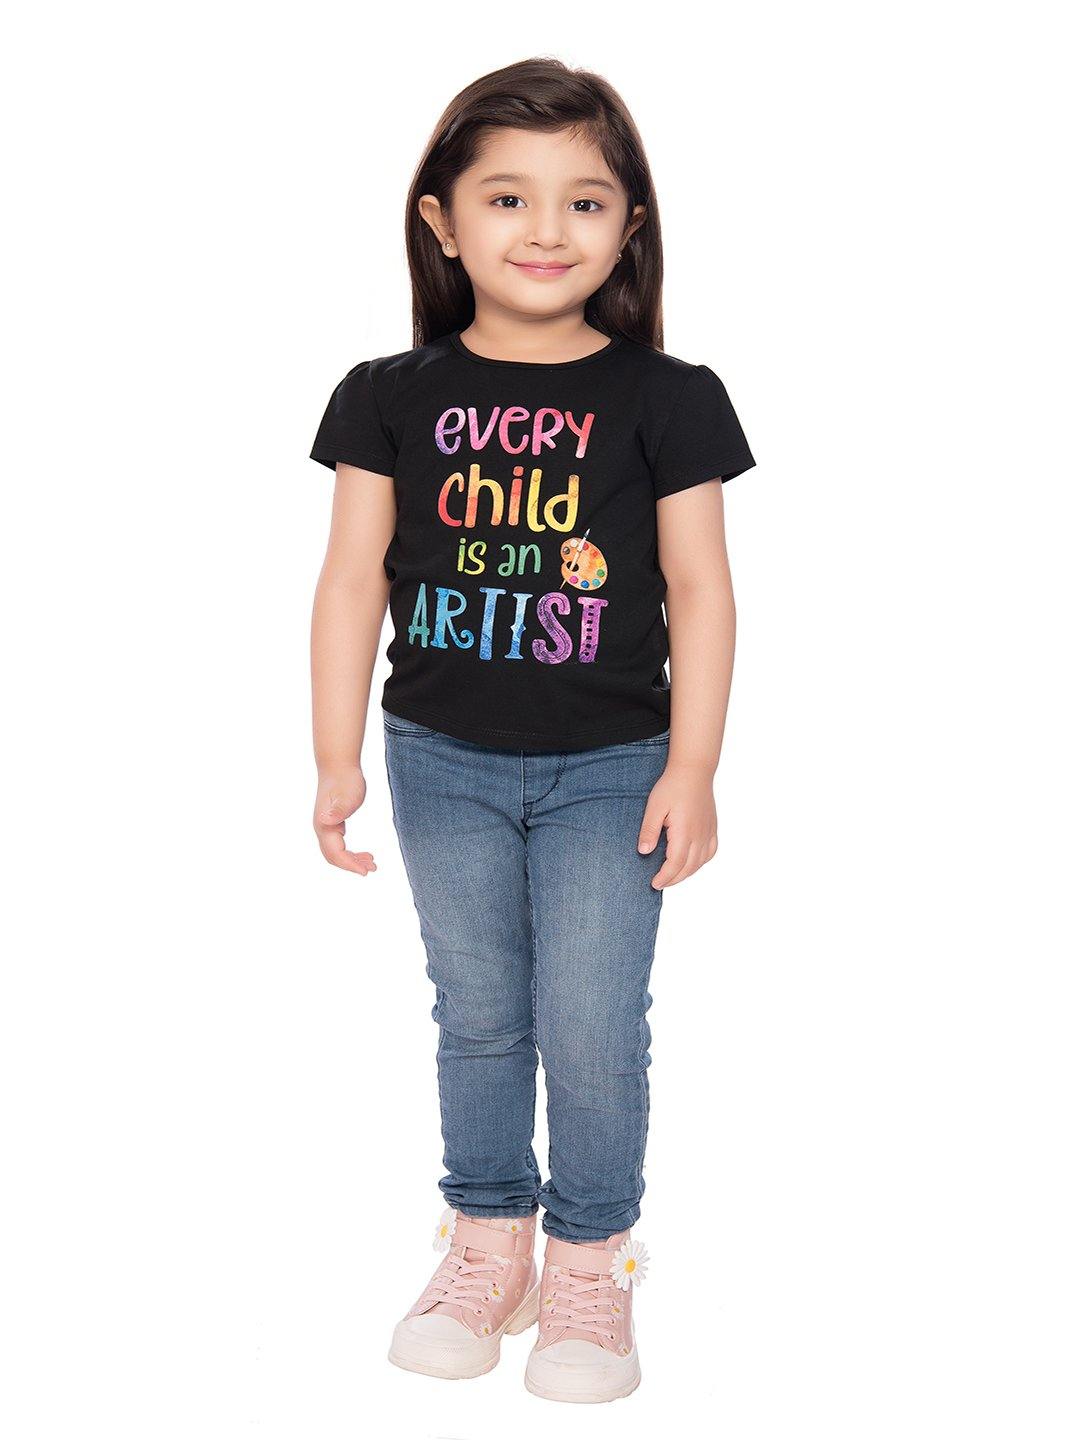 Tiny Baby Black Colored Top - T-109 Black - TINY BABY INDIA shop.tinybaby.in